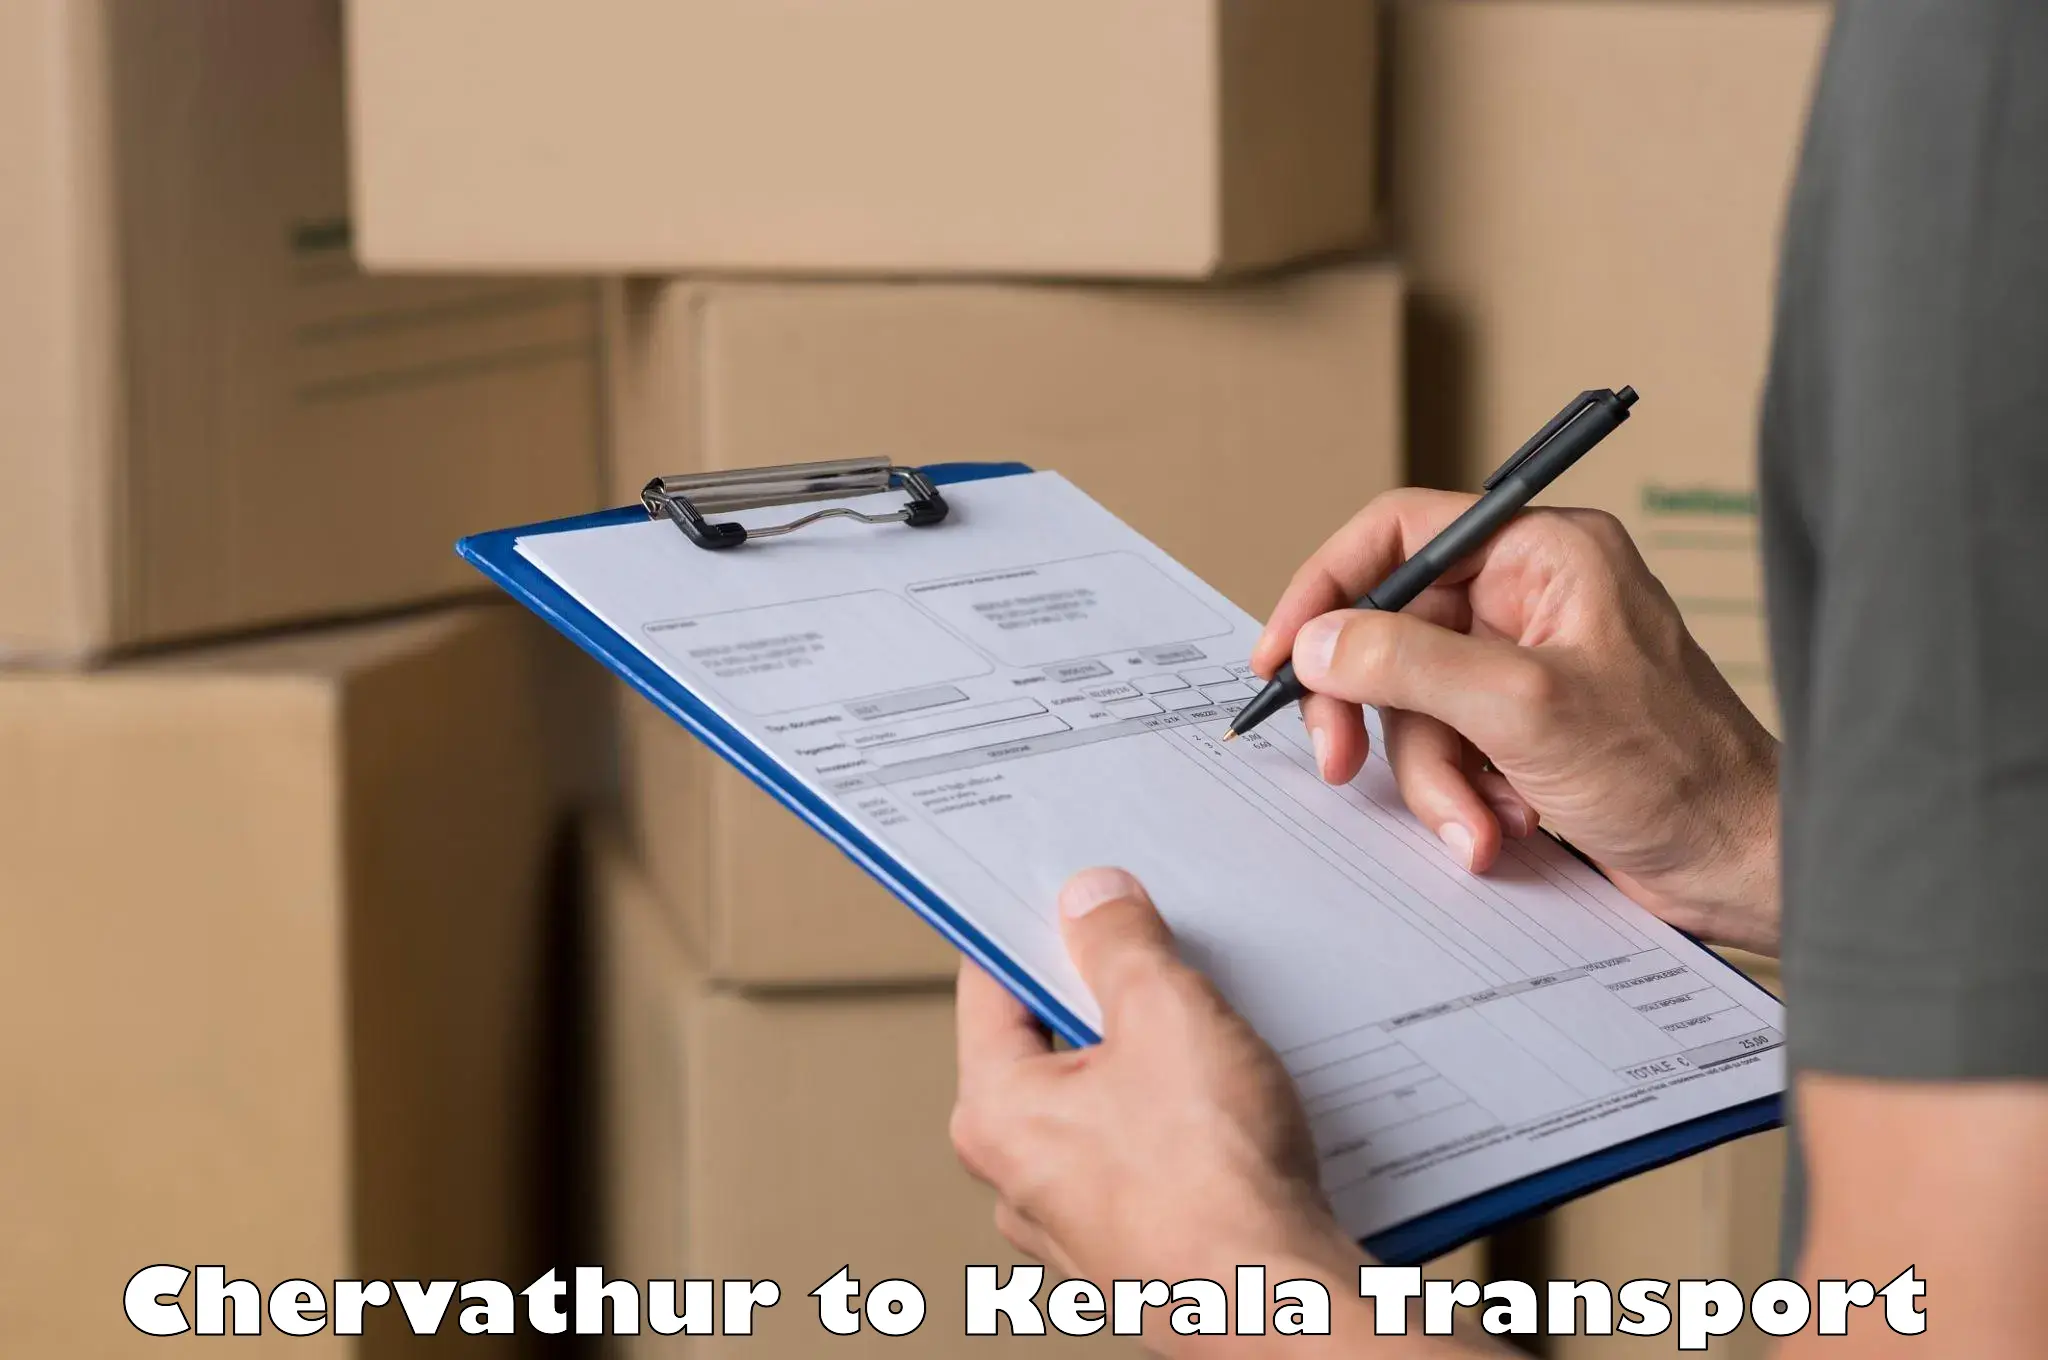 Air freight transport services in Chervathur to Koyilandy